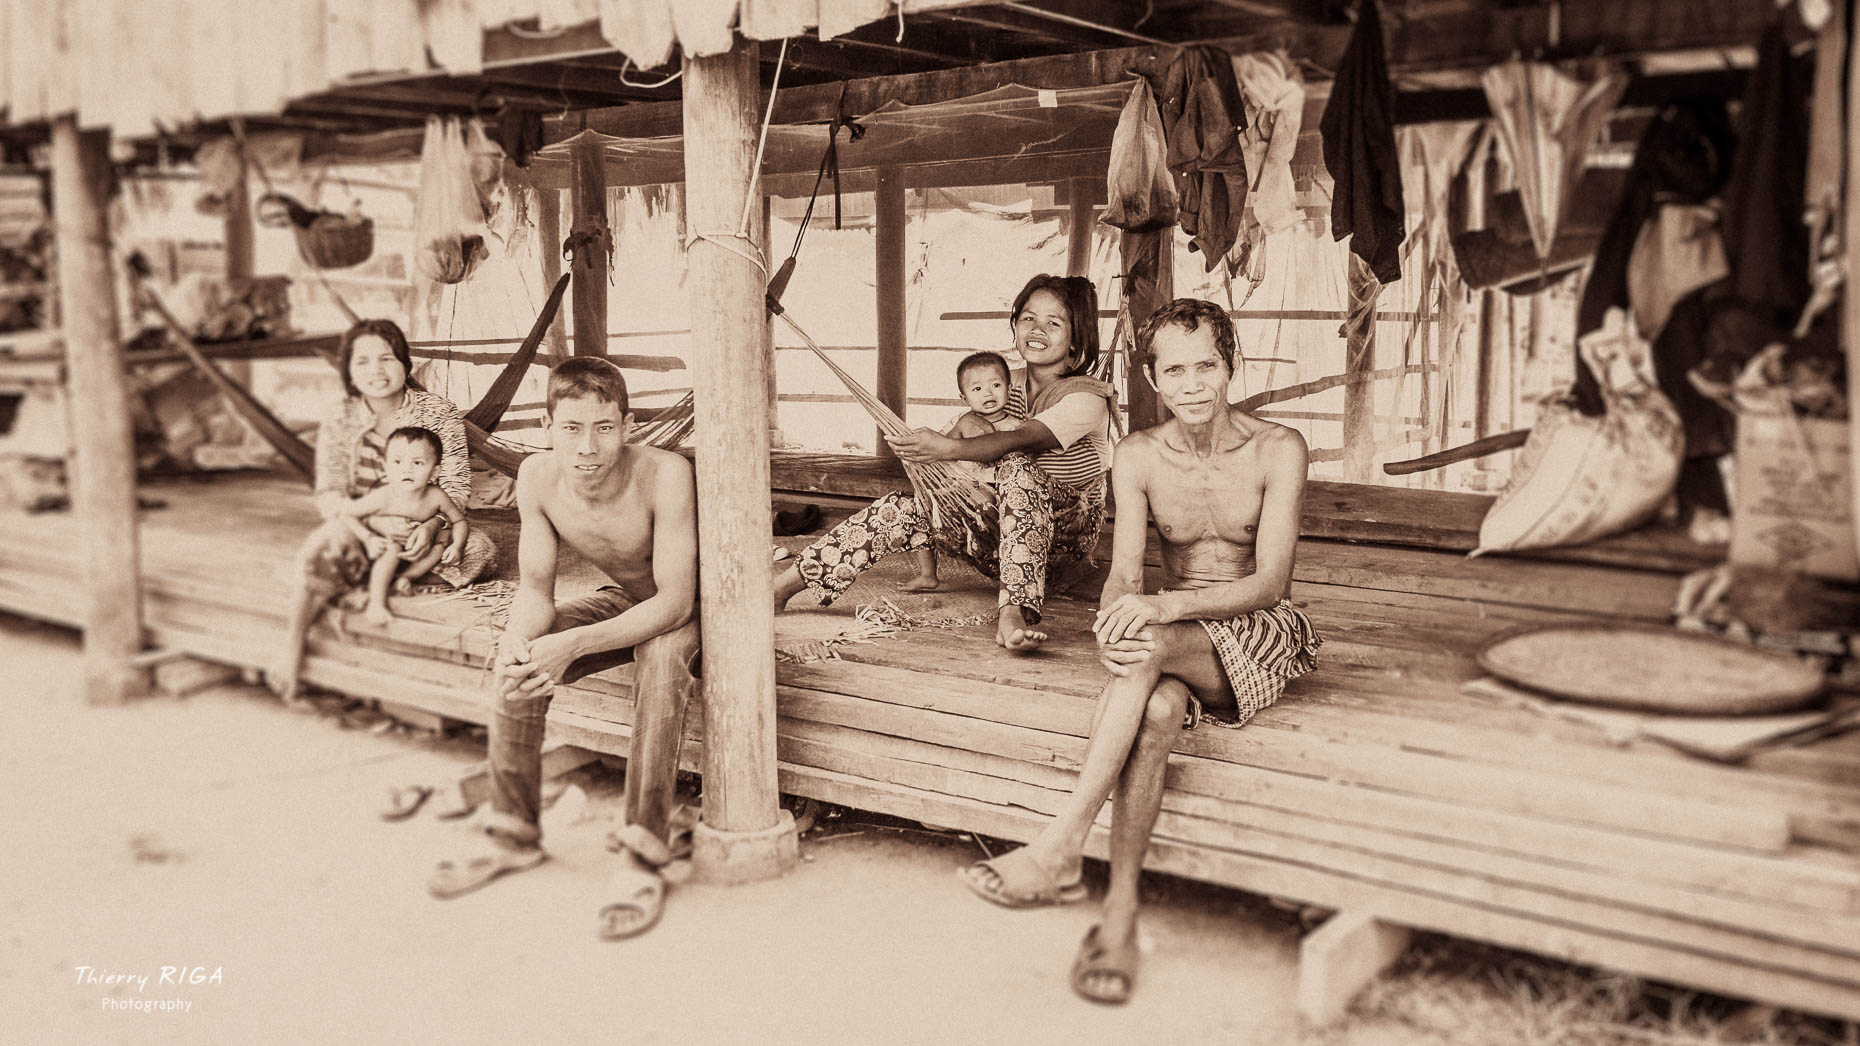 cambodia village with traditional family, Thierry Riga, Angkor Photography